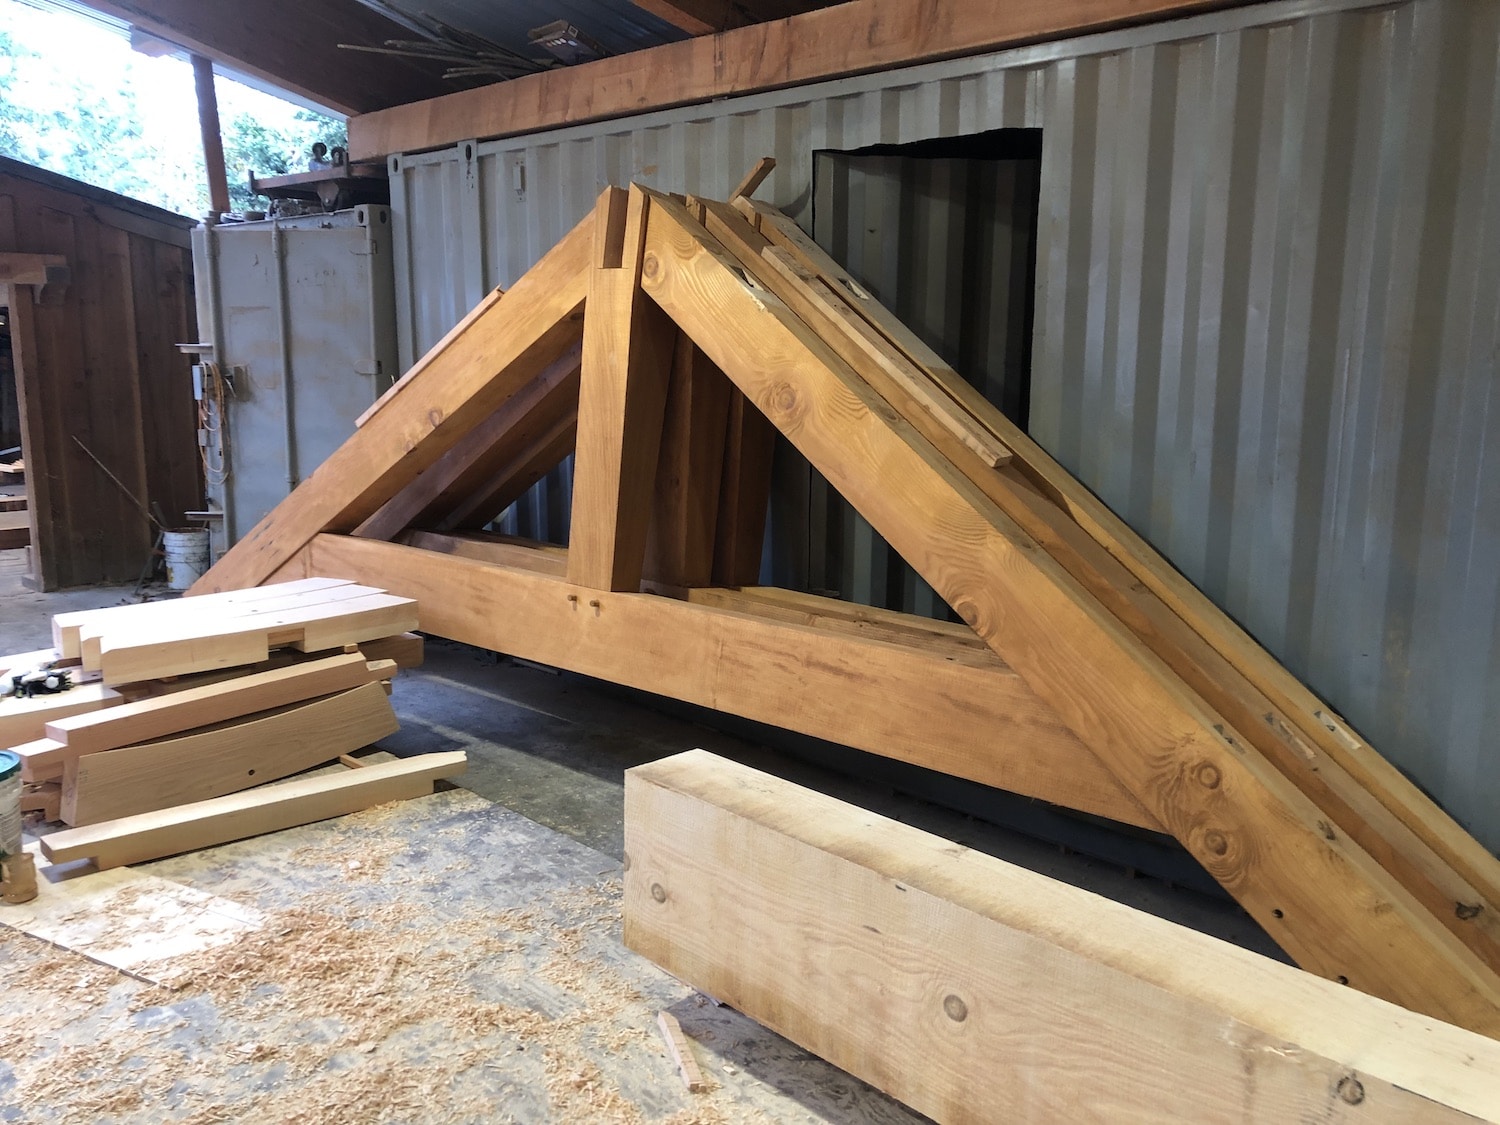 The Timber Frame Crafting Shop